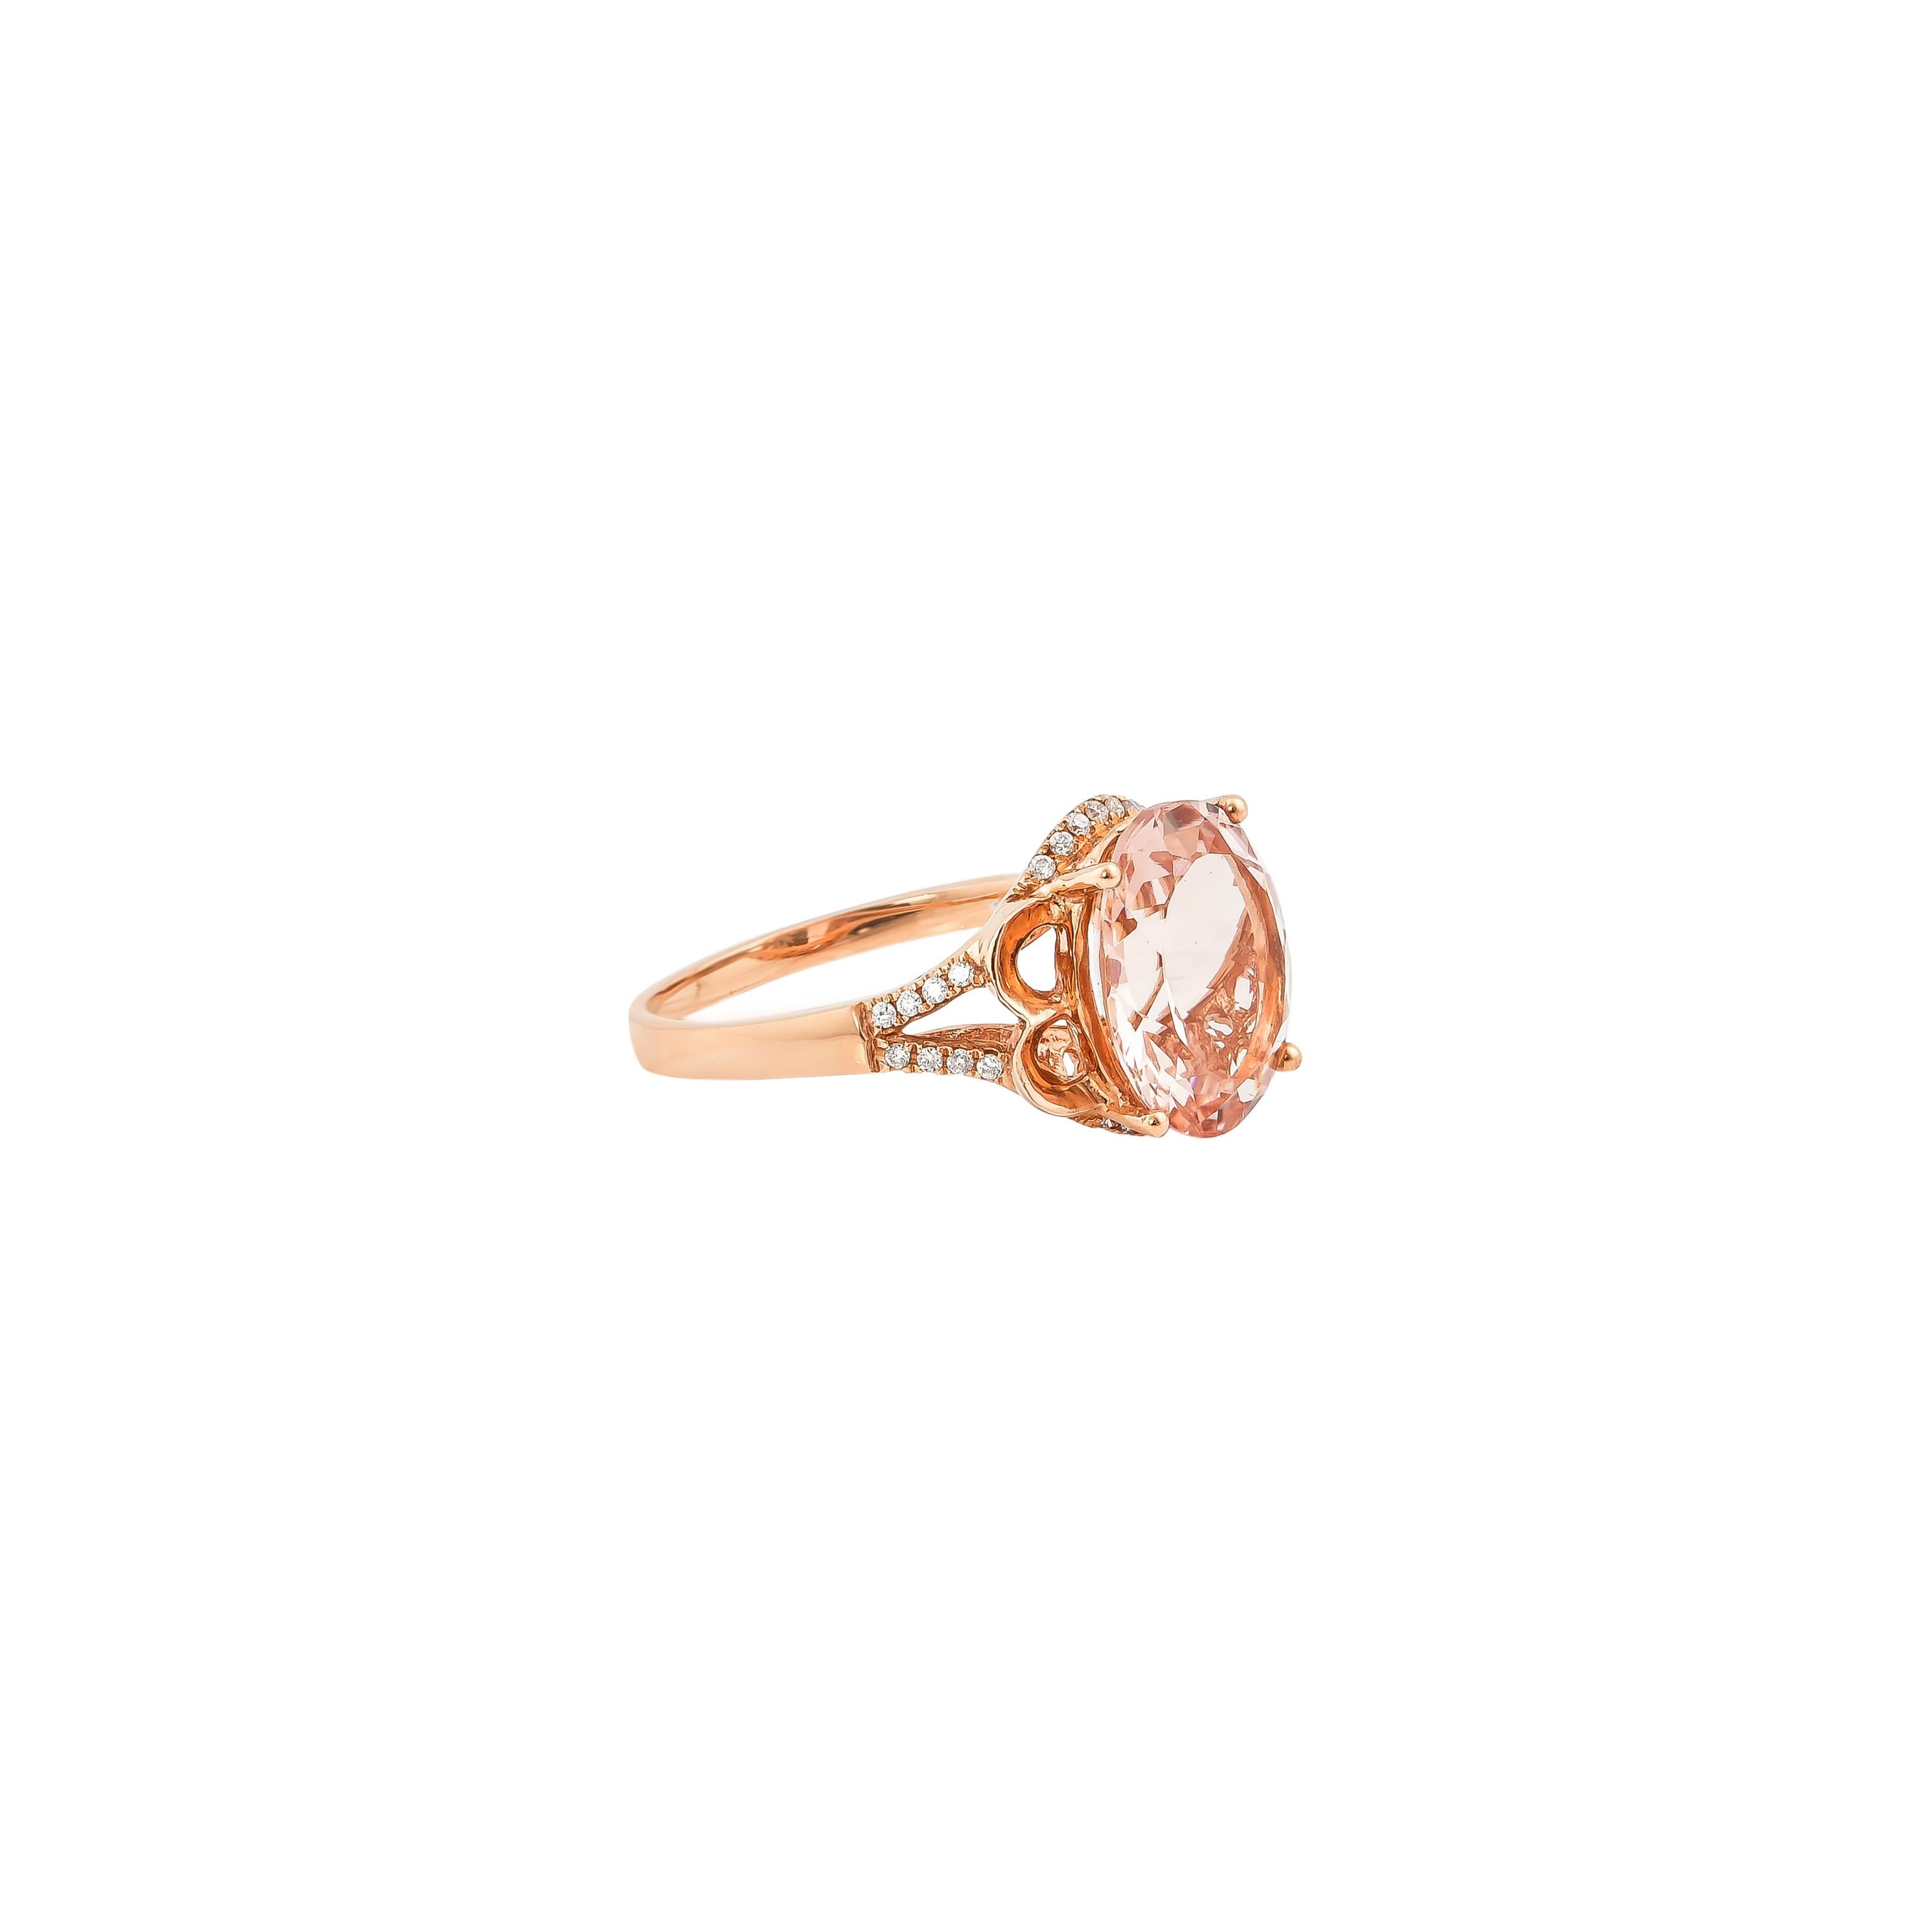 This collection features an array of magnificent morganites! Accented with diamonds these rings are made in rose gold and present a classic yet elegant look. 

Classic morganite ring in 18K rose gold with diamonds. 

Morganite: 2.400 carat oval